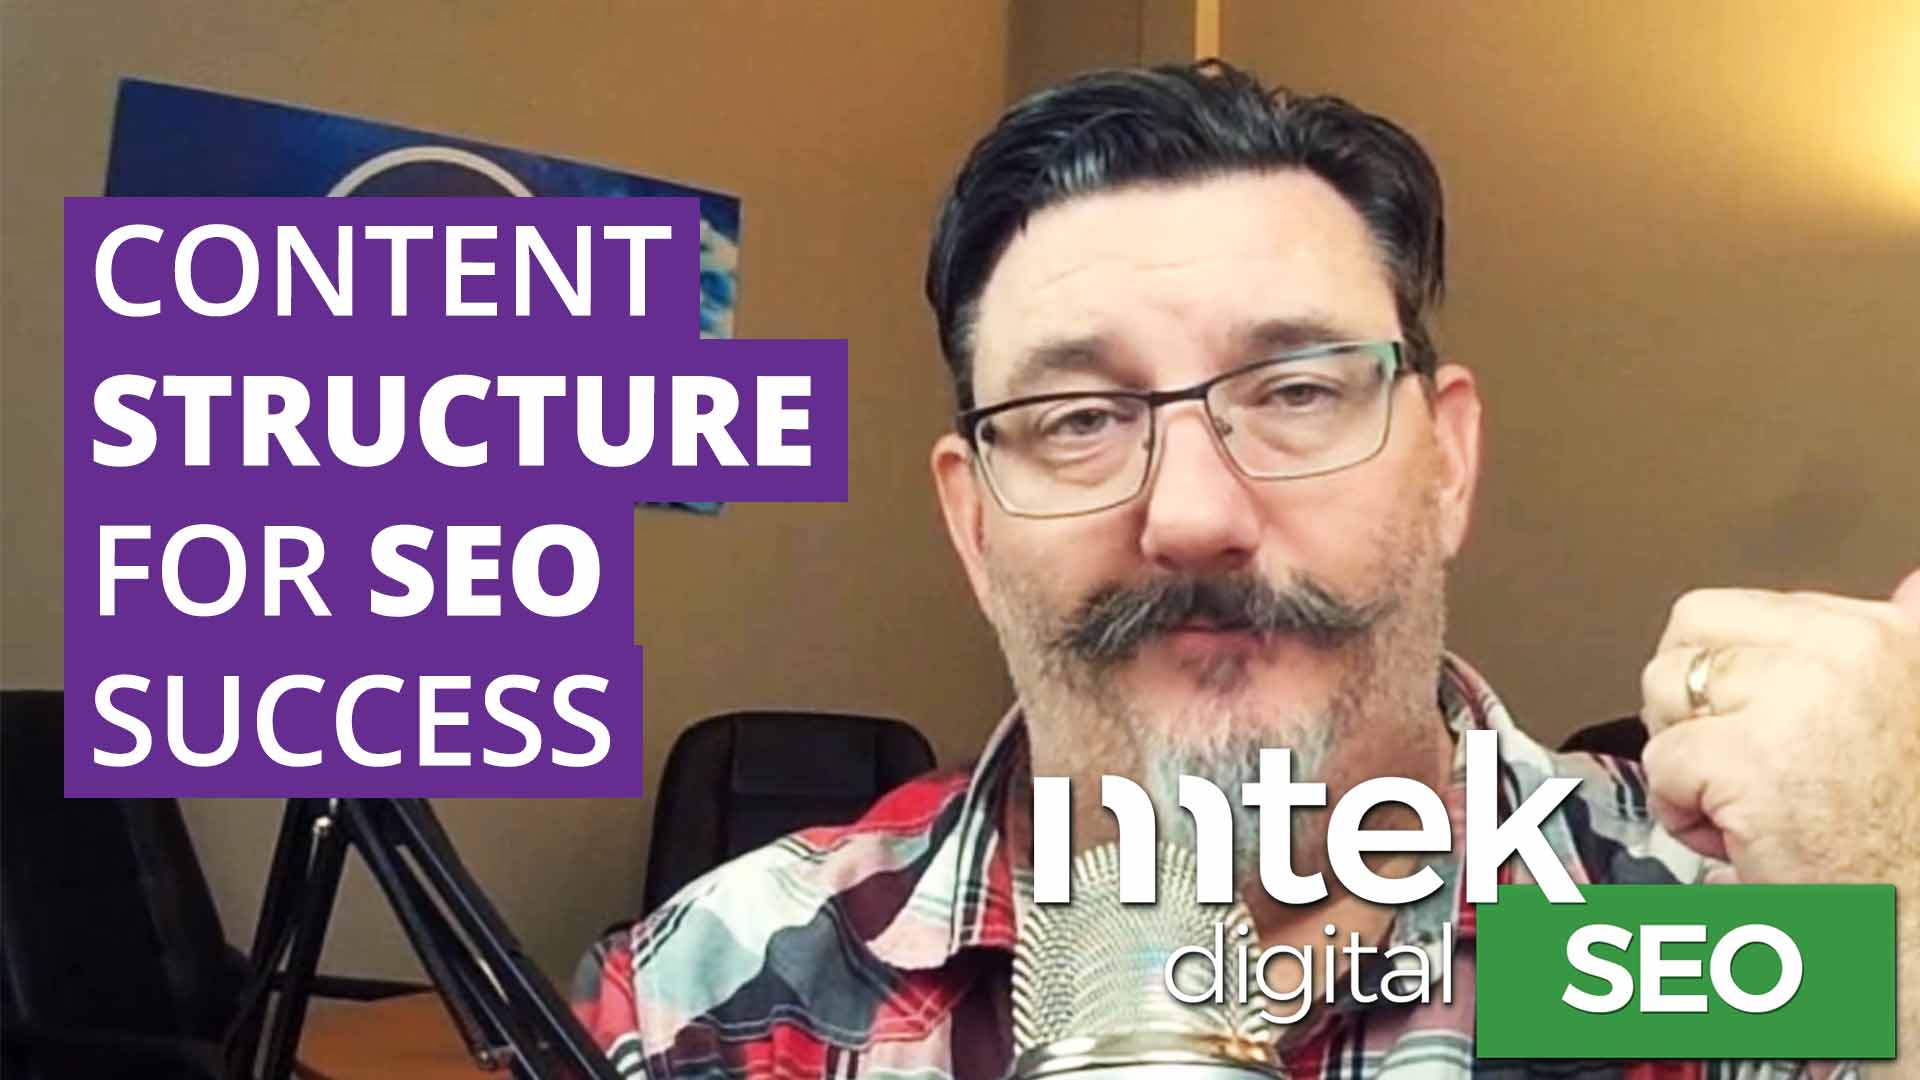 Greg Structure Data for SEO